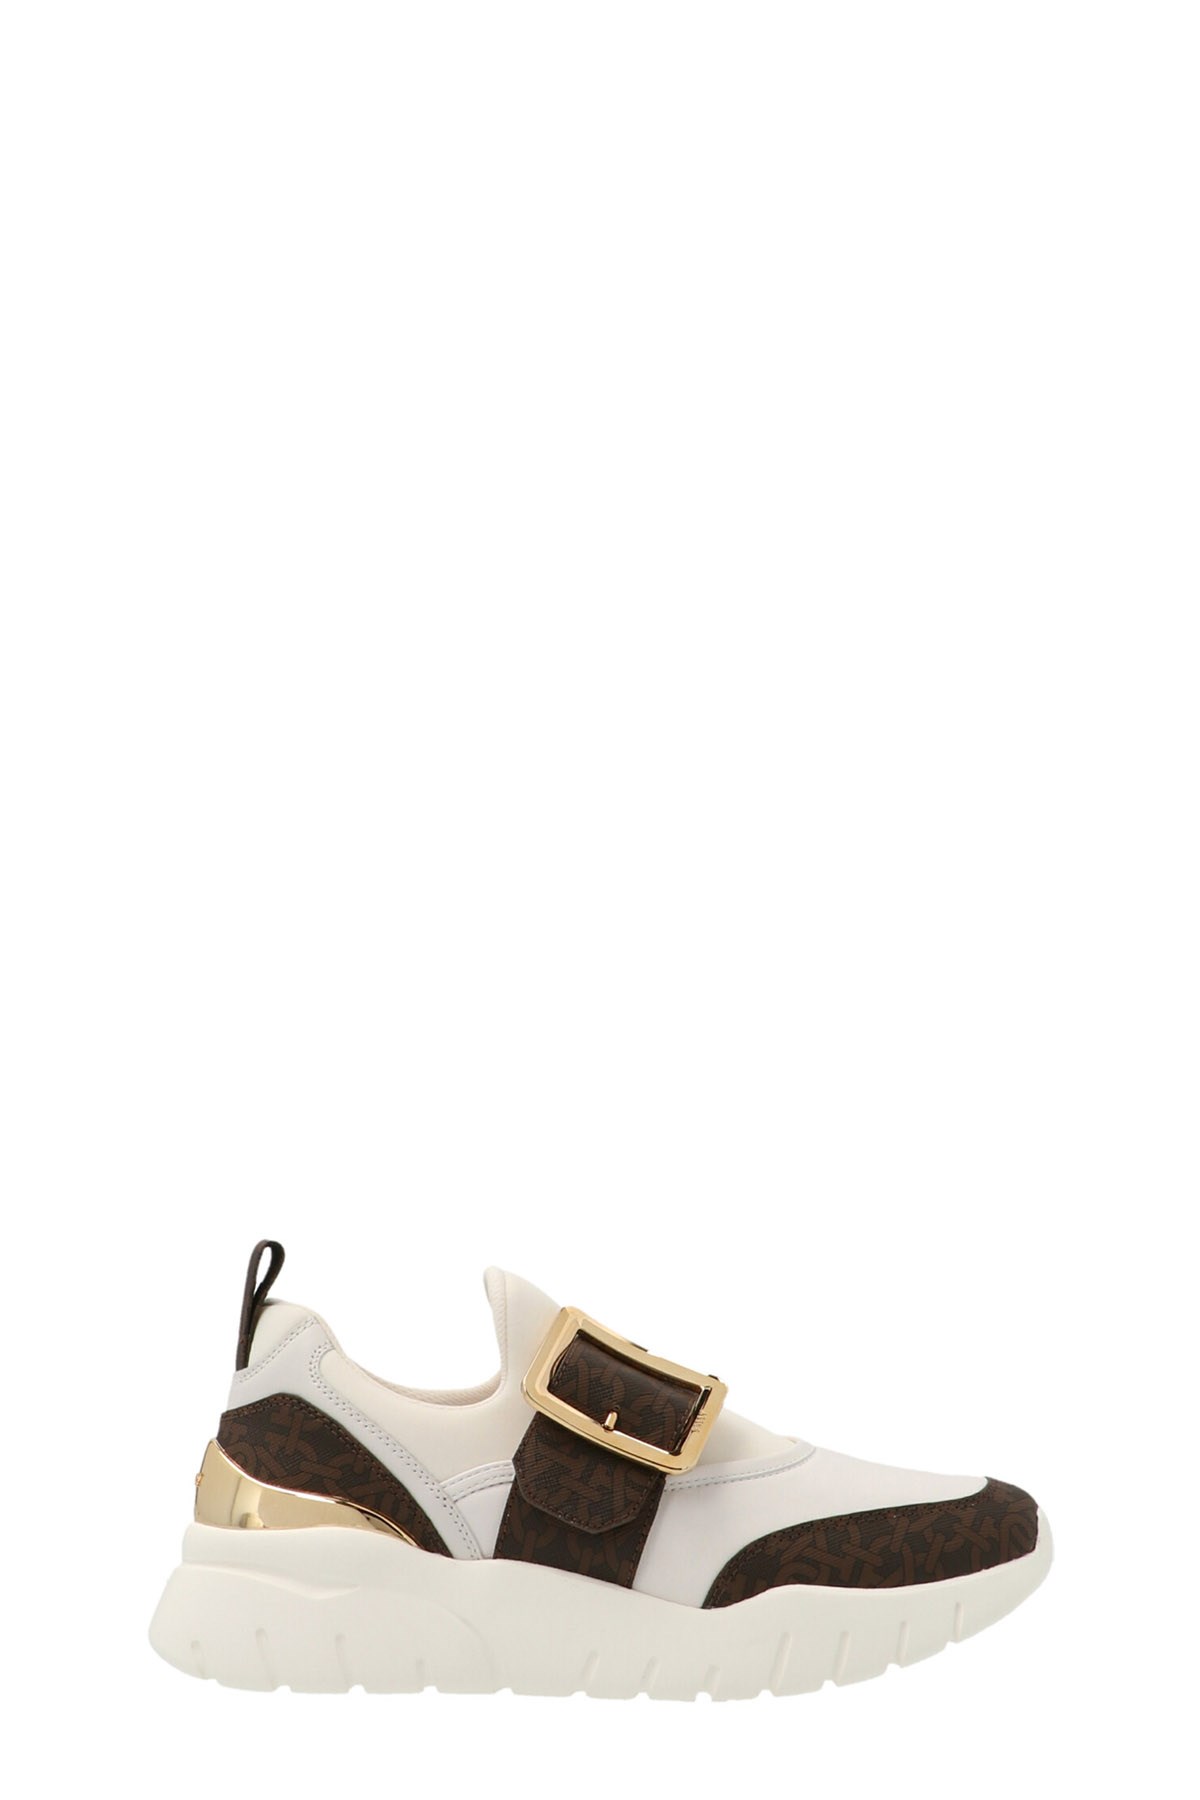 BALLY Sneakers 'Brinelle 20'